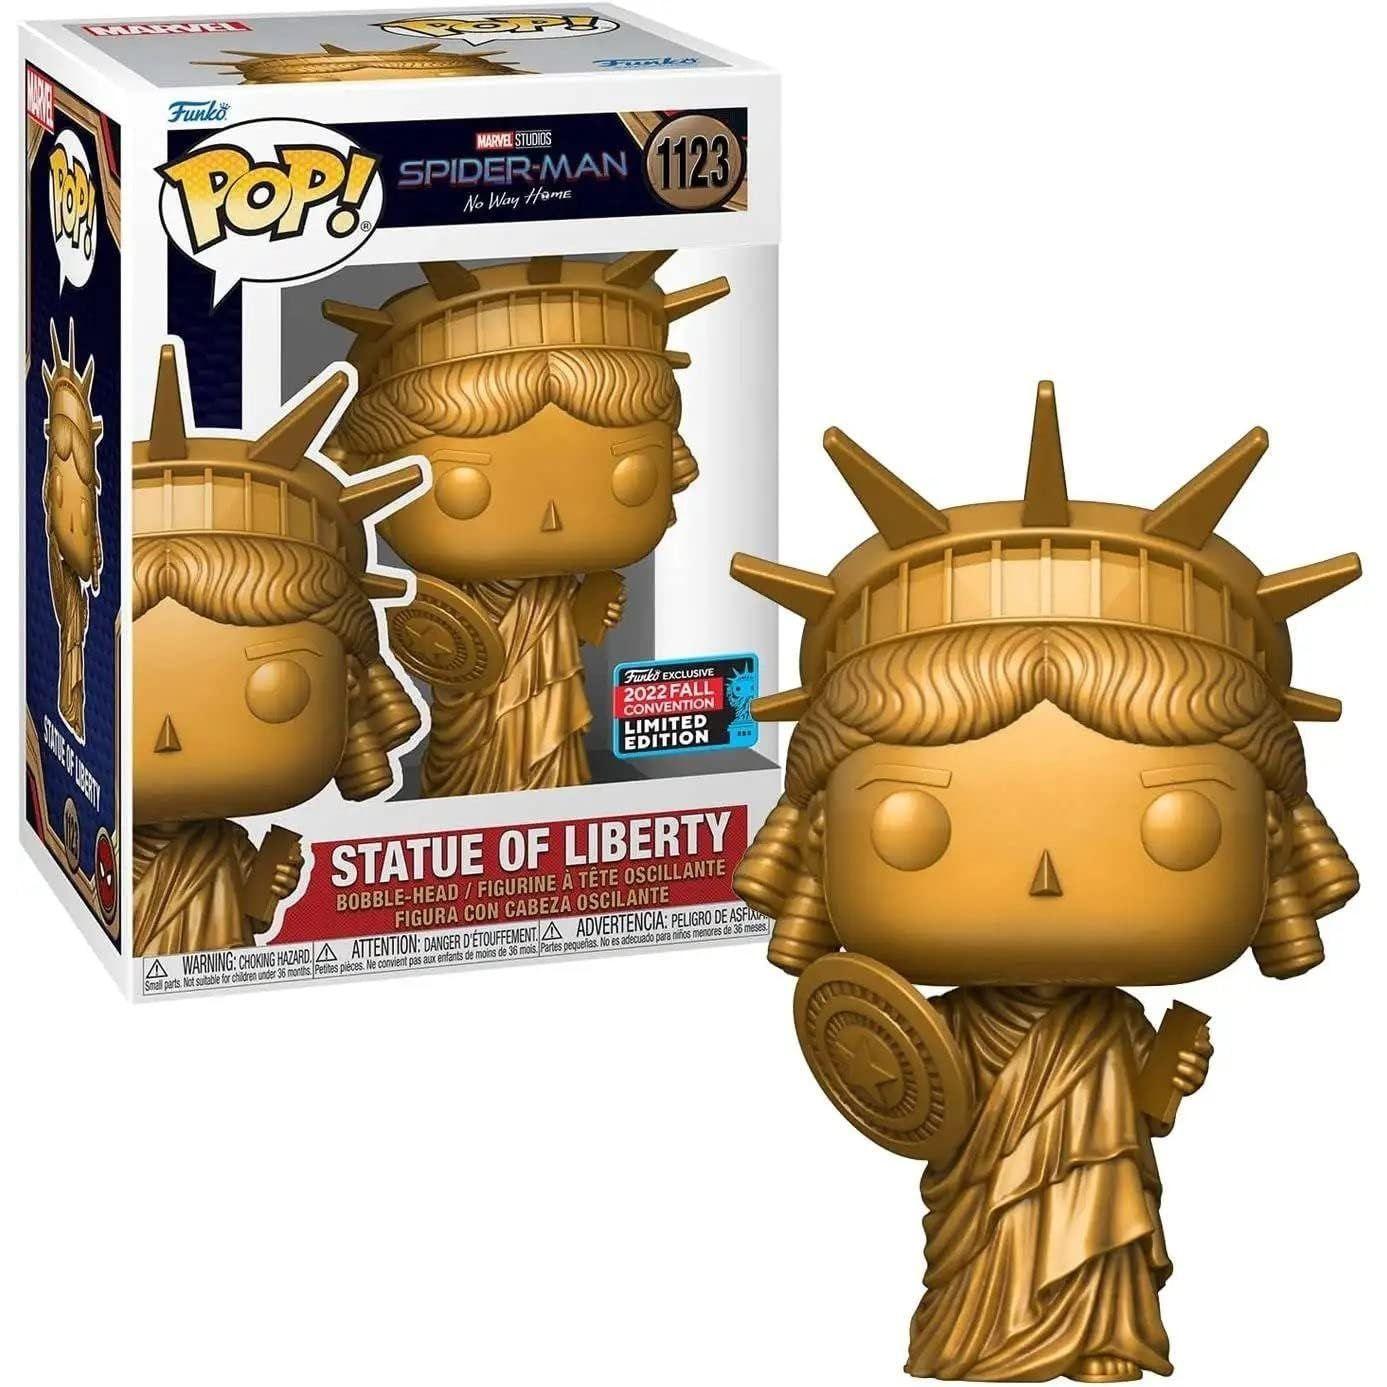 Funko Pop! Marvel Spider-Man No Way Home - Statue of Liberty, Fall Convention Exclusive - BumbleToys - 18+, Action Figures, Avengers, Boys, Characters, Funko, Pre-Order, Spider man, Spiderman